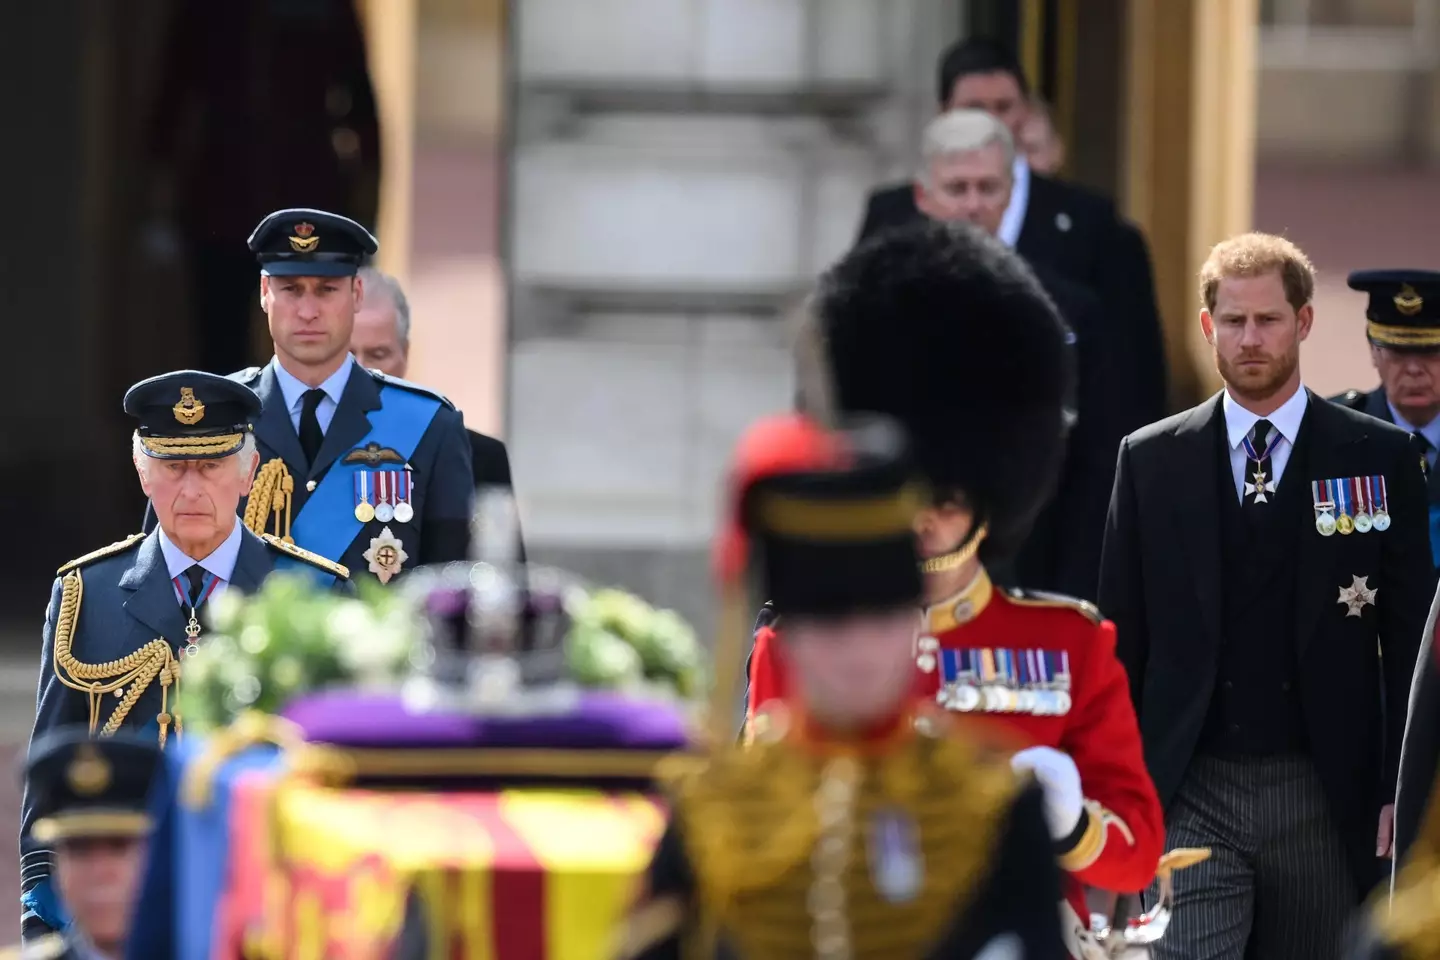 Prince William and Harry walked side by side behind The Queen's coffin.